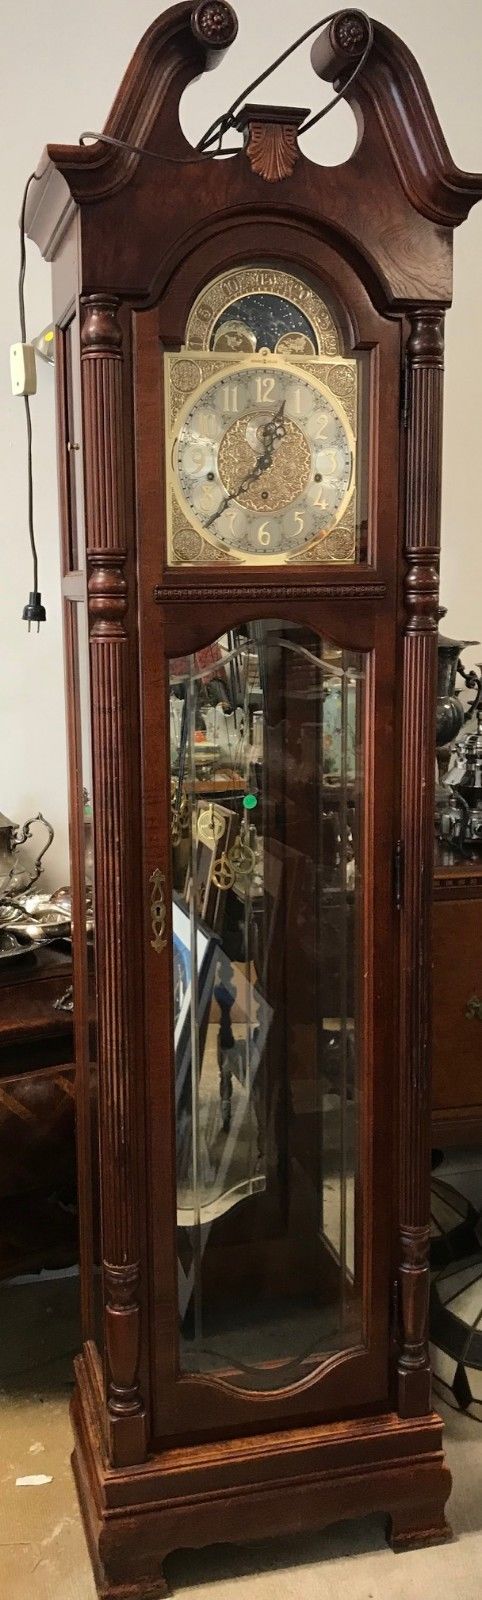 Gorgeous Howard Miller Grandfather Clock - Works Perfect/ kEY